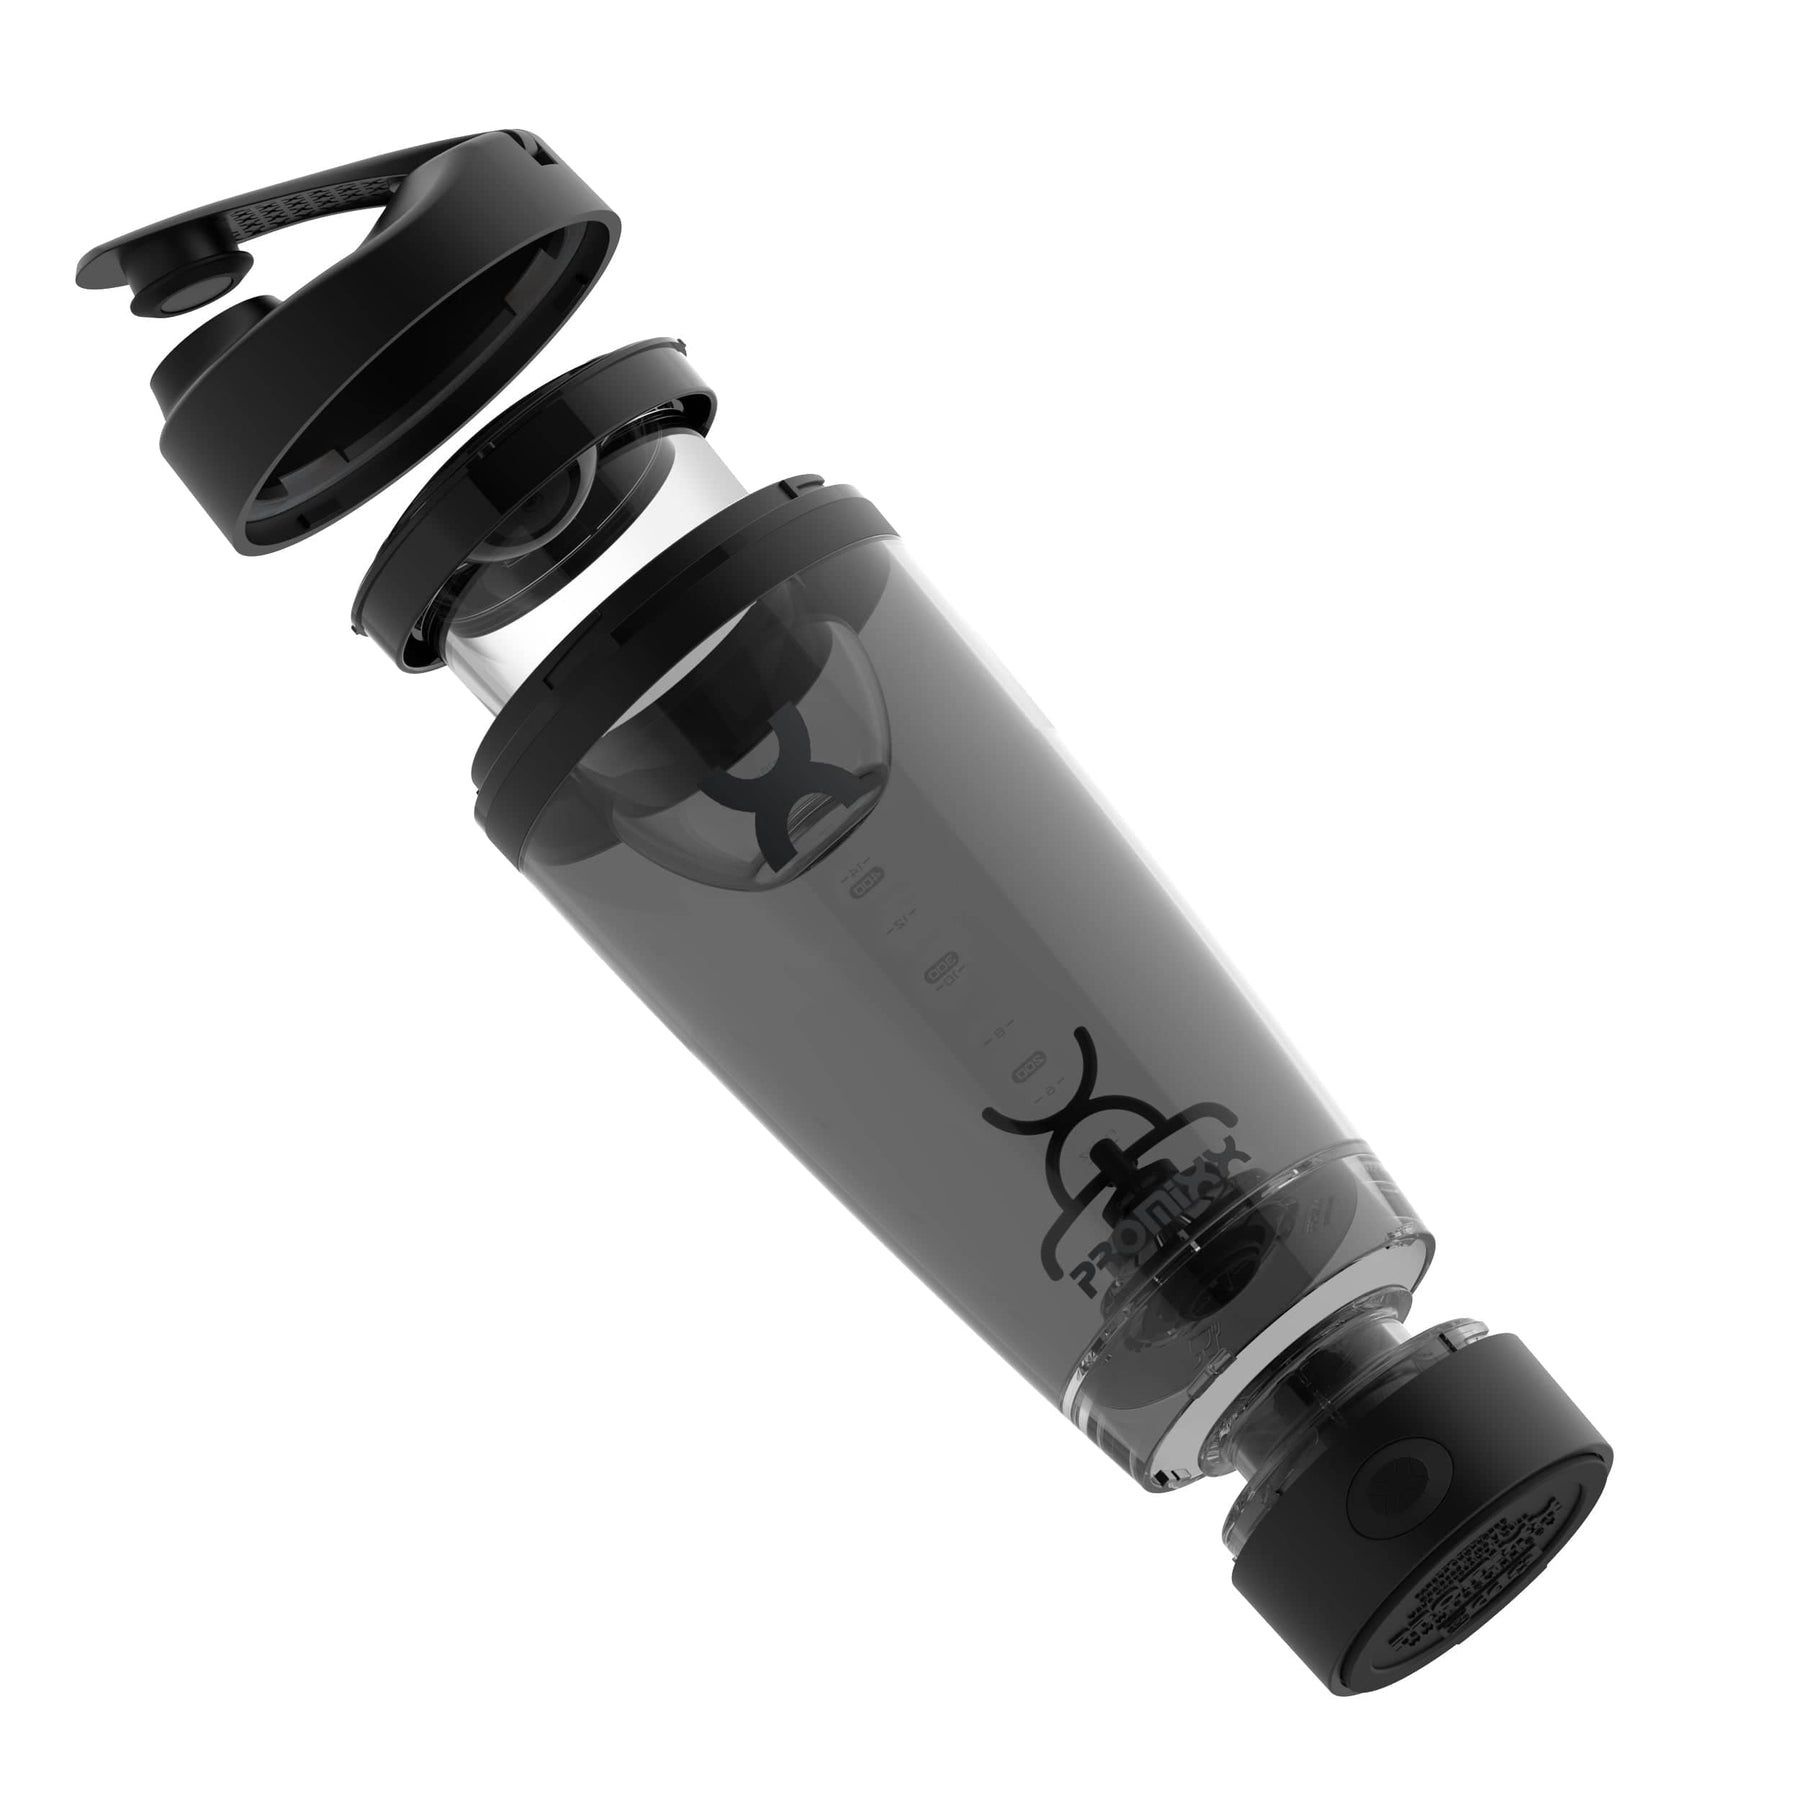 Promixx CHARGE Rechargeable USB-C Electric Shaker Bottle with Portable  Battery Function - Stealth Black - 20oz